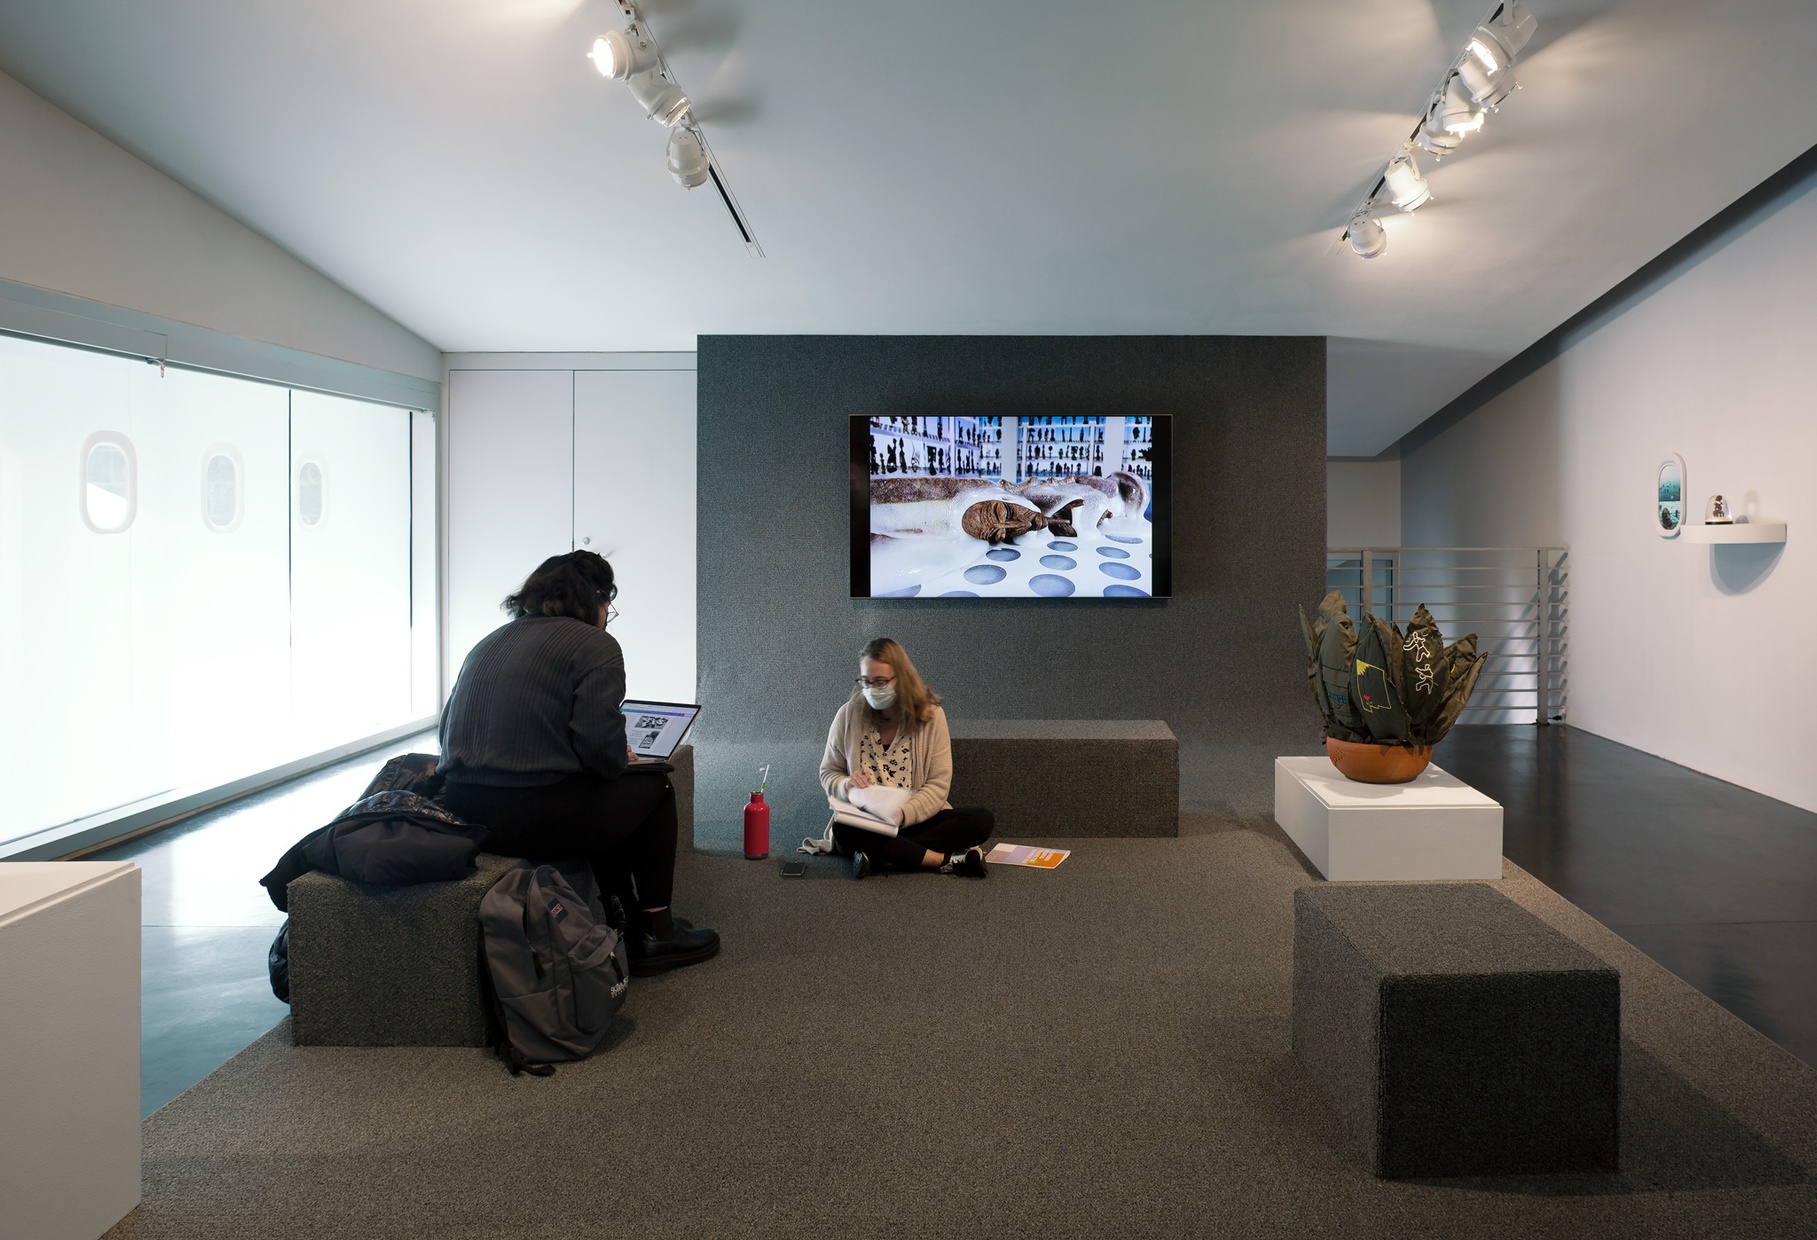 Two people sitting in a gallery with a soft sculpture of a cactus to their right and a television monitor of an animated image on the wall behind them.